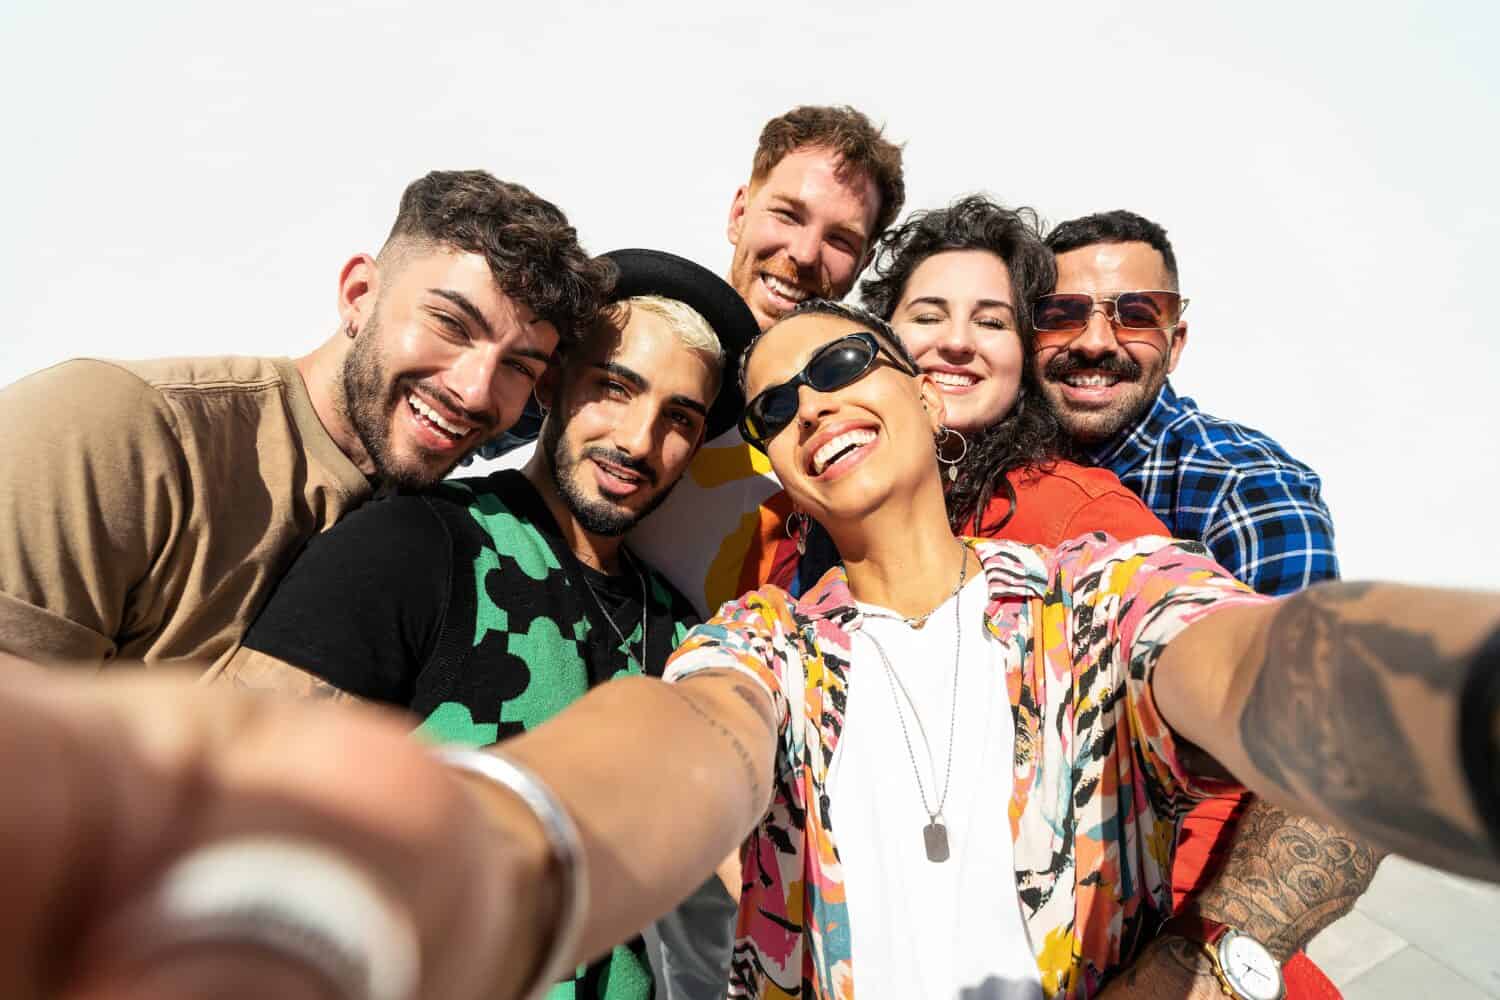 Group of happy young friends having fun and laughing while taking a selfie with mobile phone. Diverse millennial people spending time together. Friendship concept. Real people lifestyle.